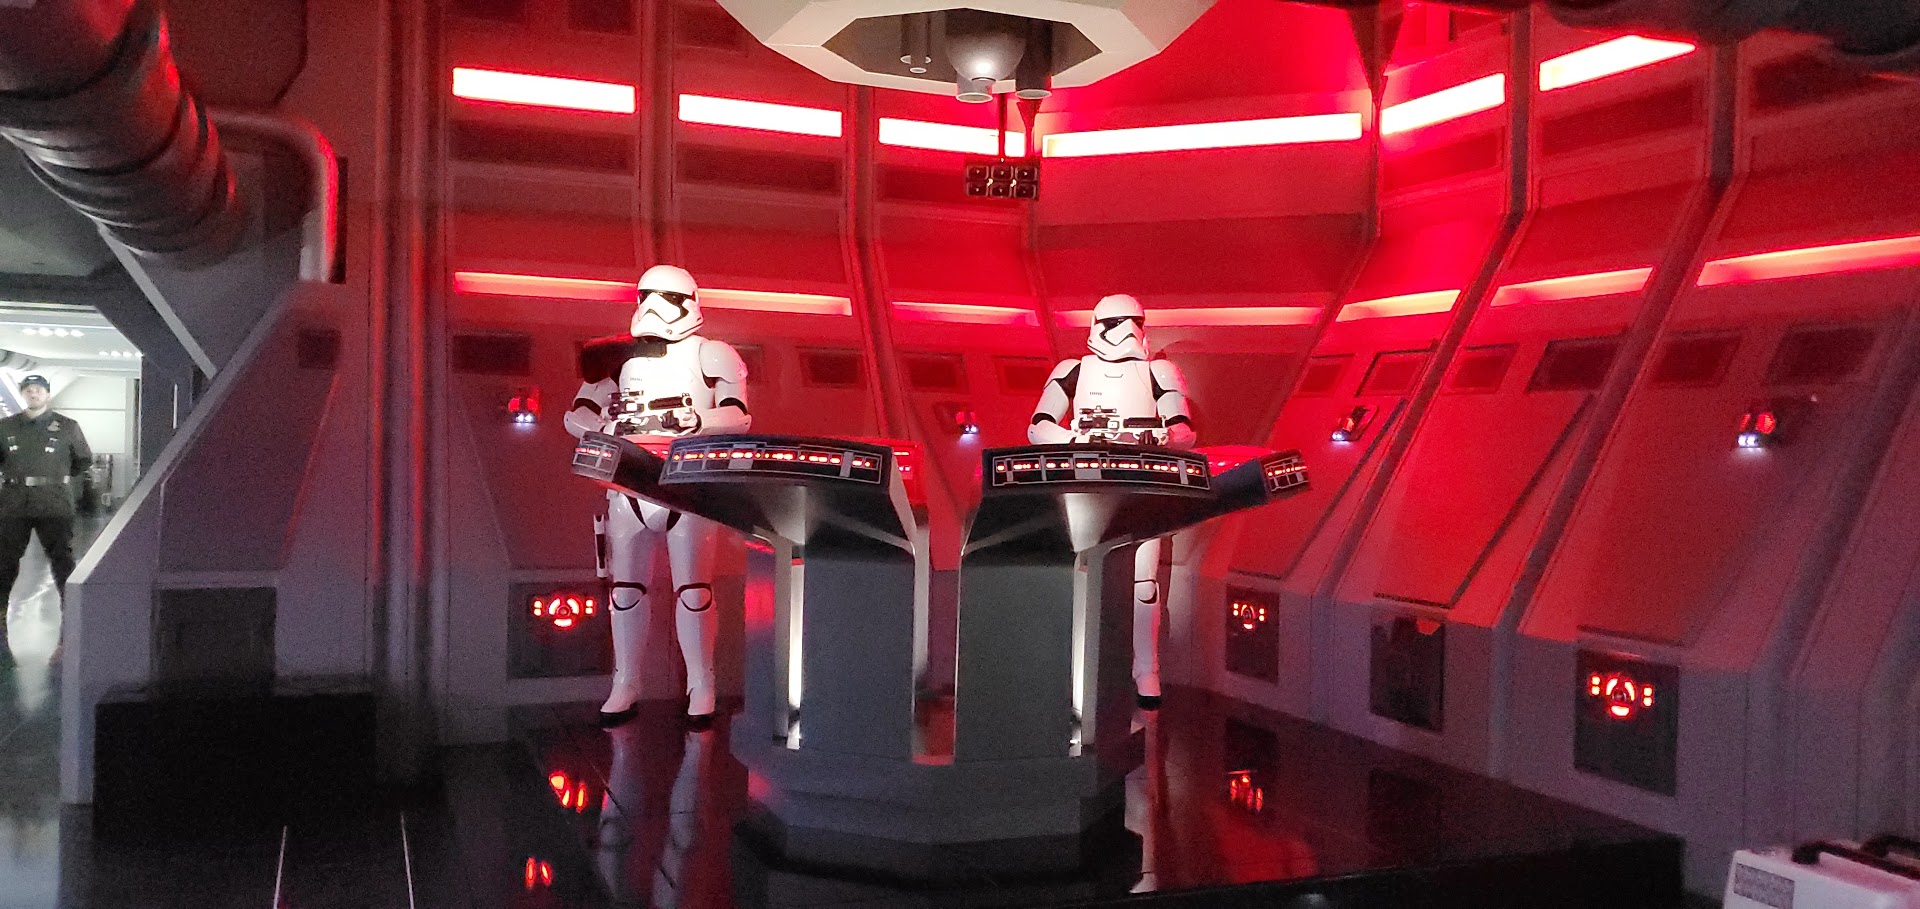 Disney World adjusts virtual queue times for Star Wars: Rise of the Resistance